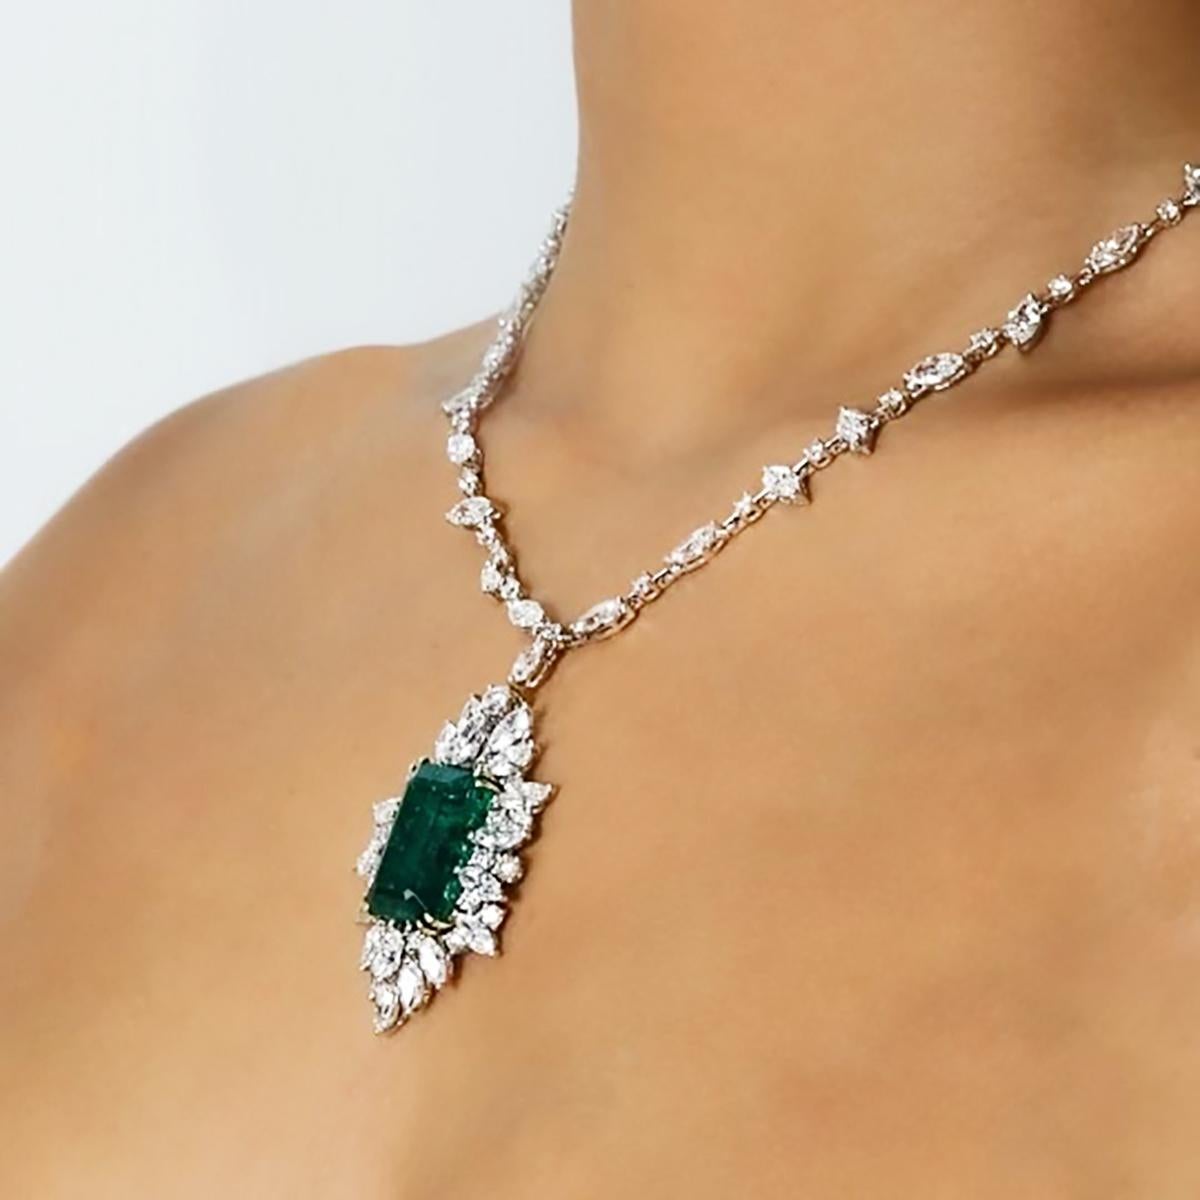 18k White gold necklace with one 19.42 carat very fine emerald and 54 Marquis cut and 55 round brilliant cut diamonds weighing approximately 25.00 carats. 